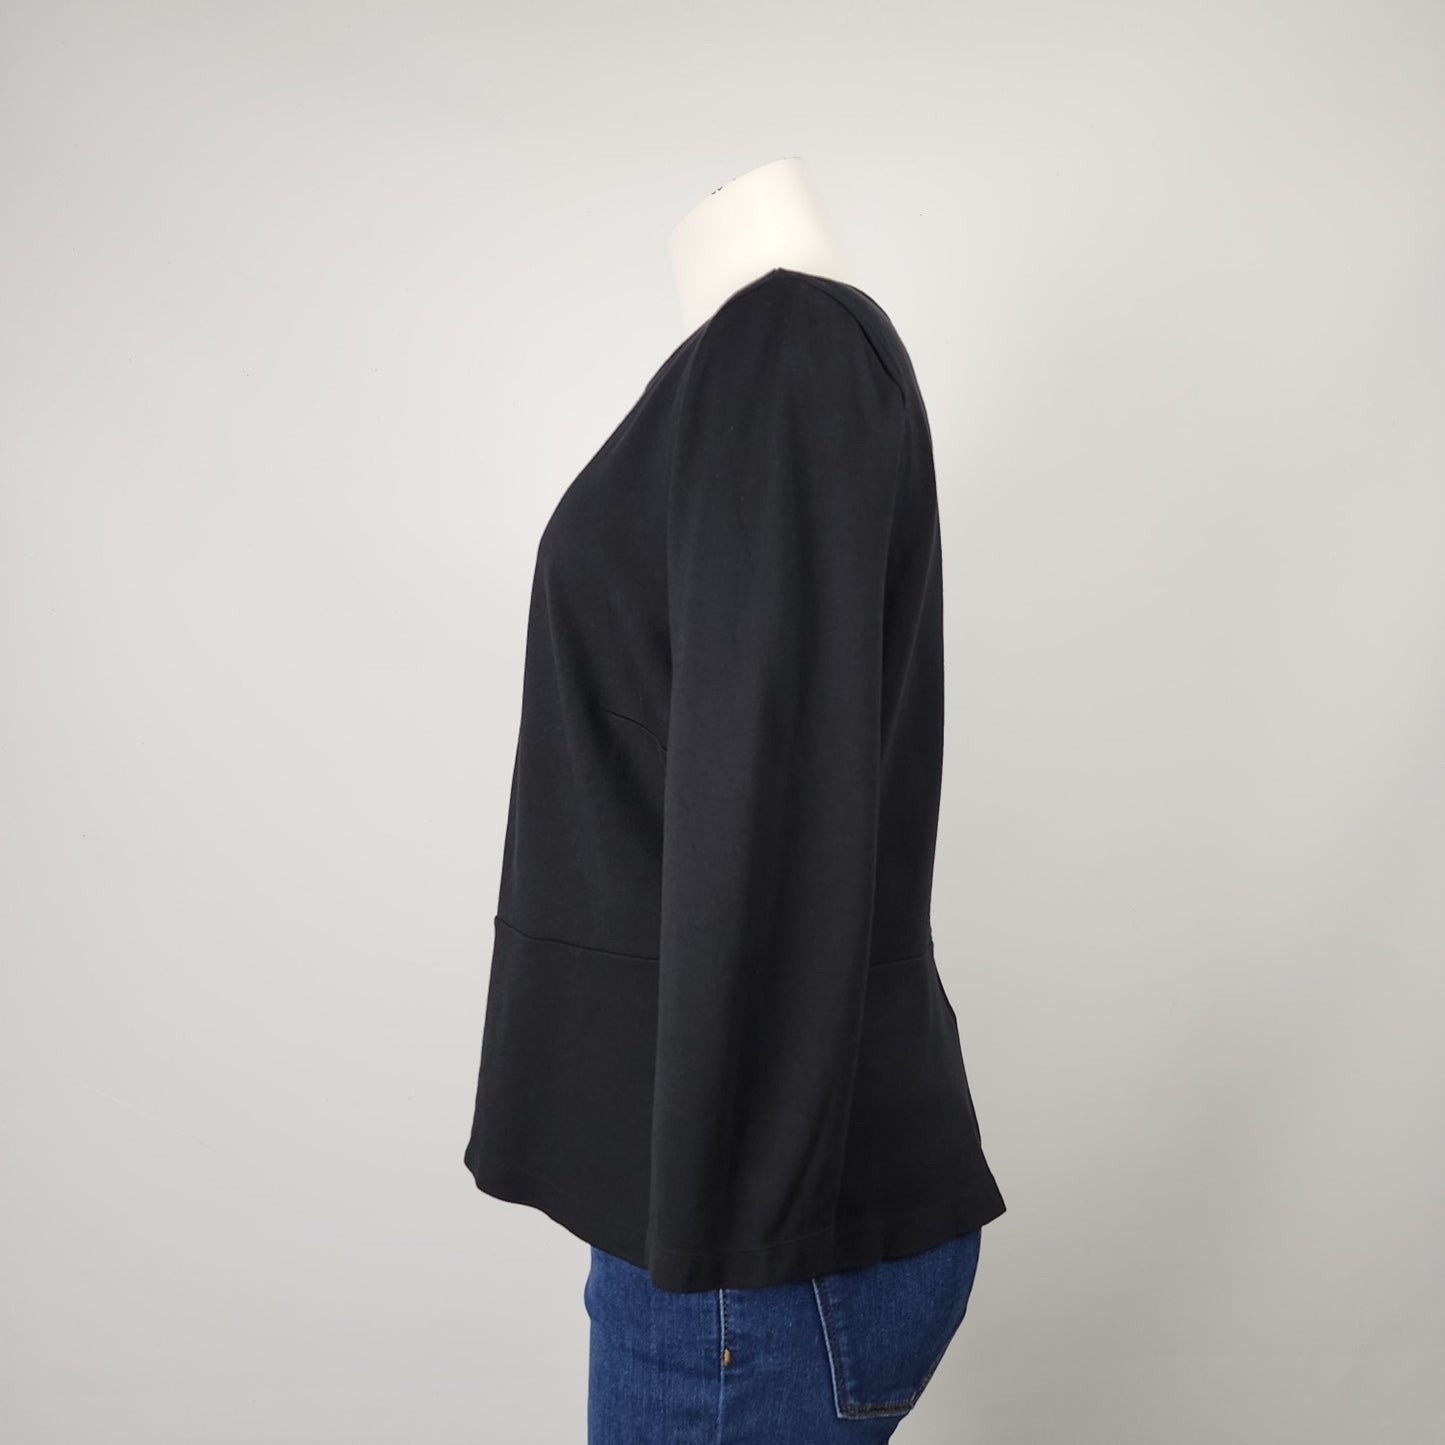 Lord & Taylor Black Long Sleeve Top Size L